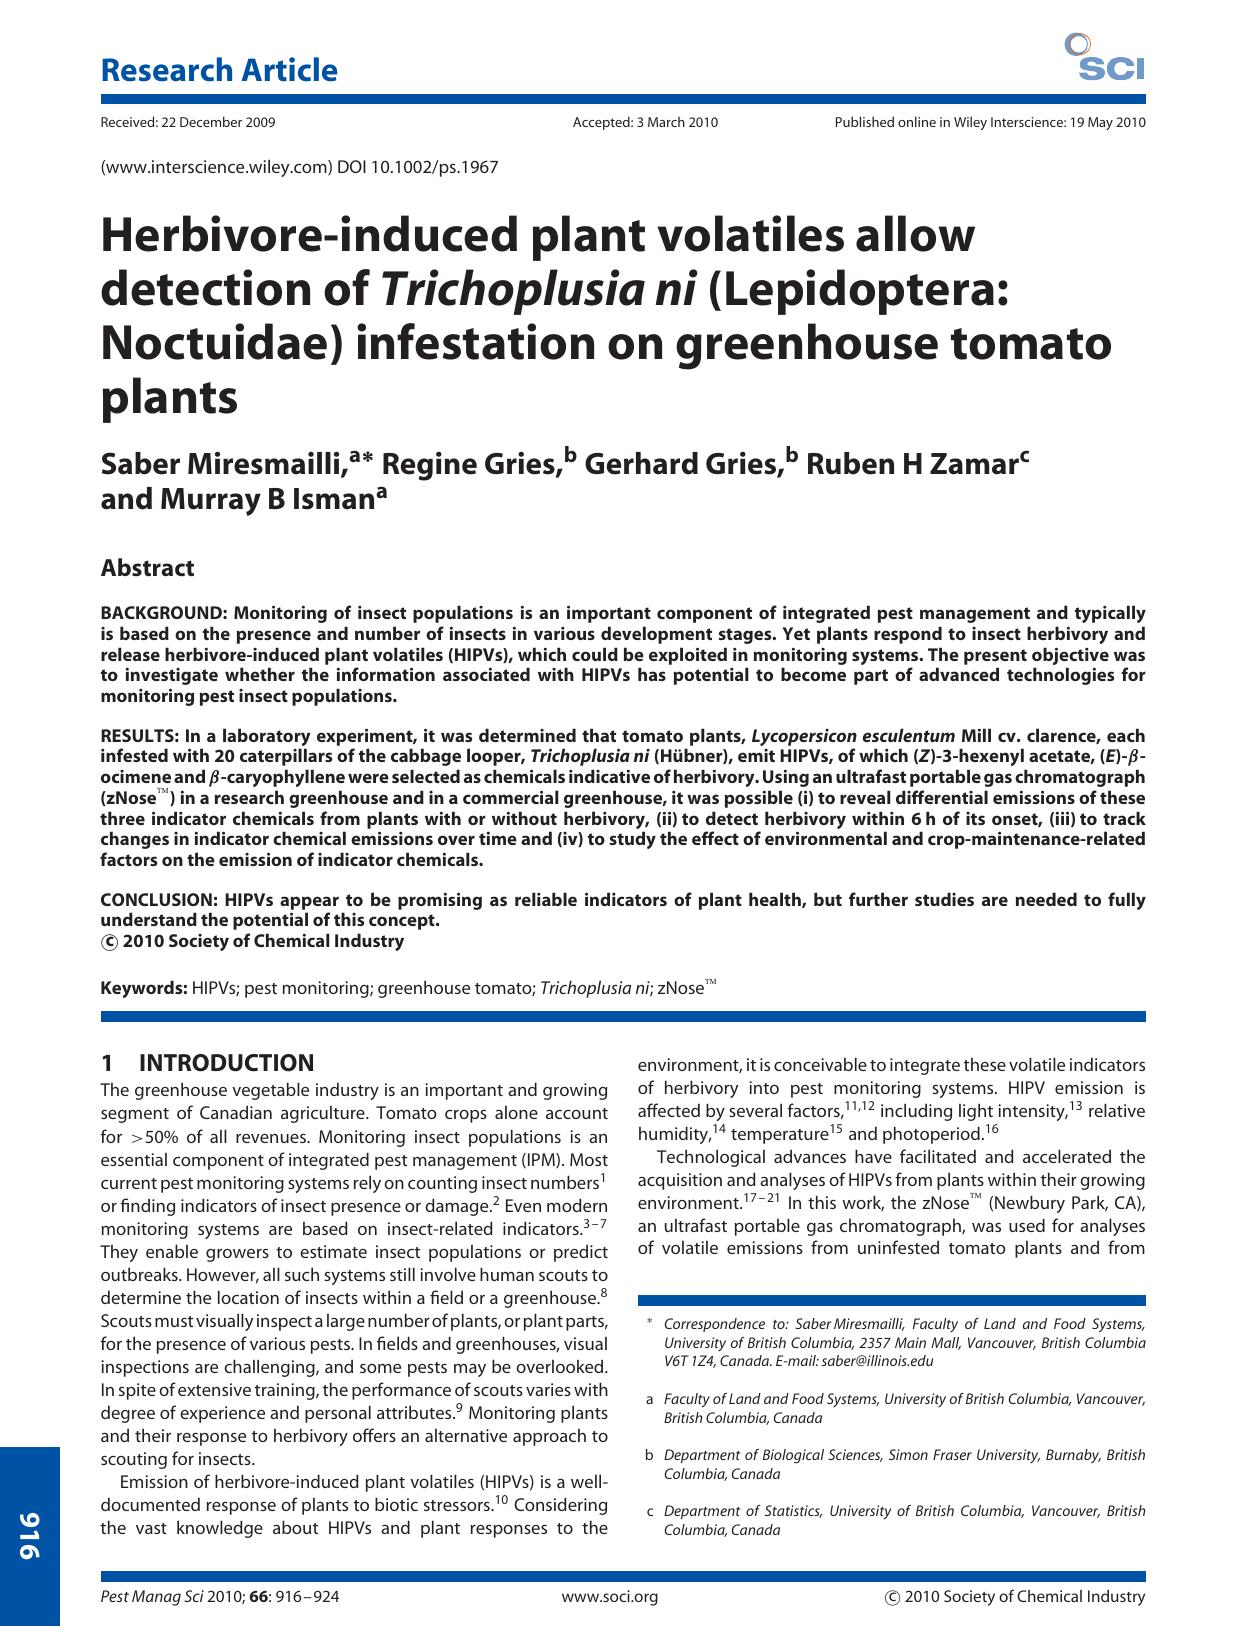 Herbivore?induced plant volatiles allow detection of Trichoplusia ni (Lepidoptera: Noctuidae) infestation on greenhouse tomato plants by Unknown